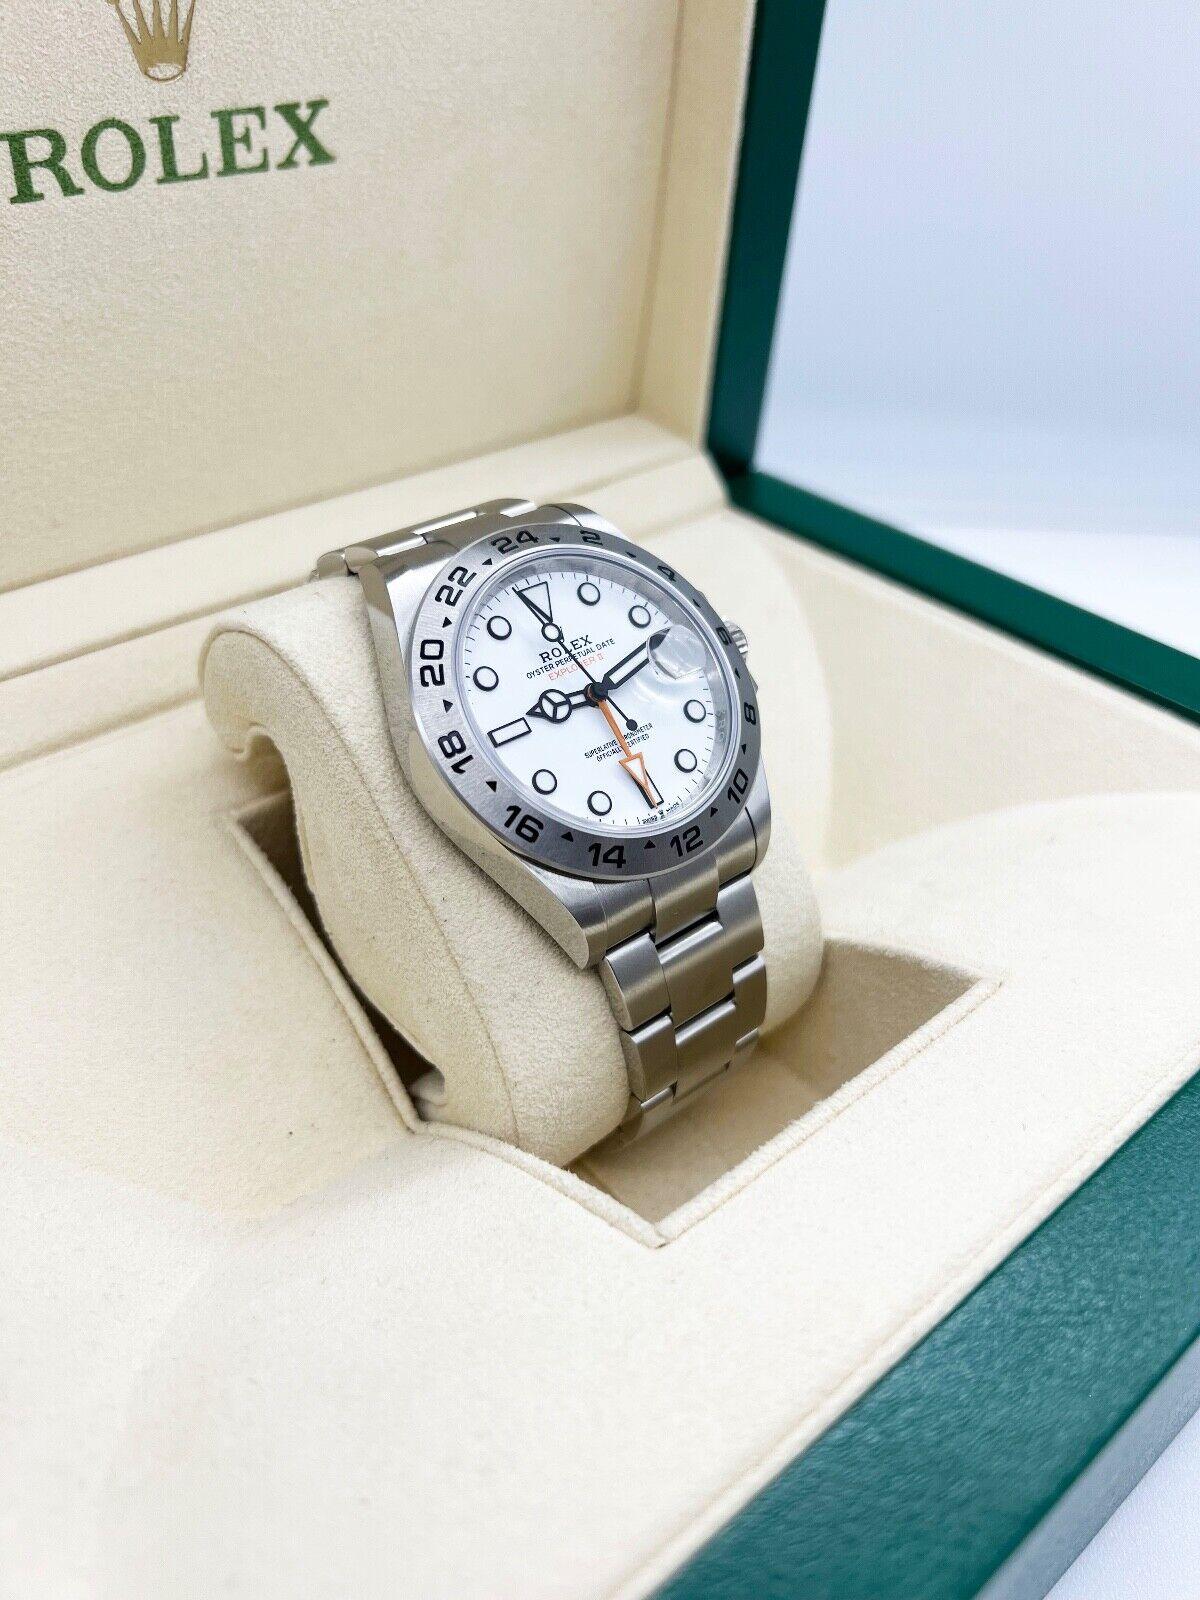 Style Number: 226570 

Serial: 1932K***

Year: 2023
 
Model: Explorer II 
 
Case Material: Stainless Steel
 
Band: Stainless Steel 
 
Bezel: Stainless Steel 
 
Dial: White
 
Face: Sapphire Crystal 
 
Case Size: 42mm 
 
Includes: 
-Rolex Box &